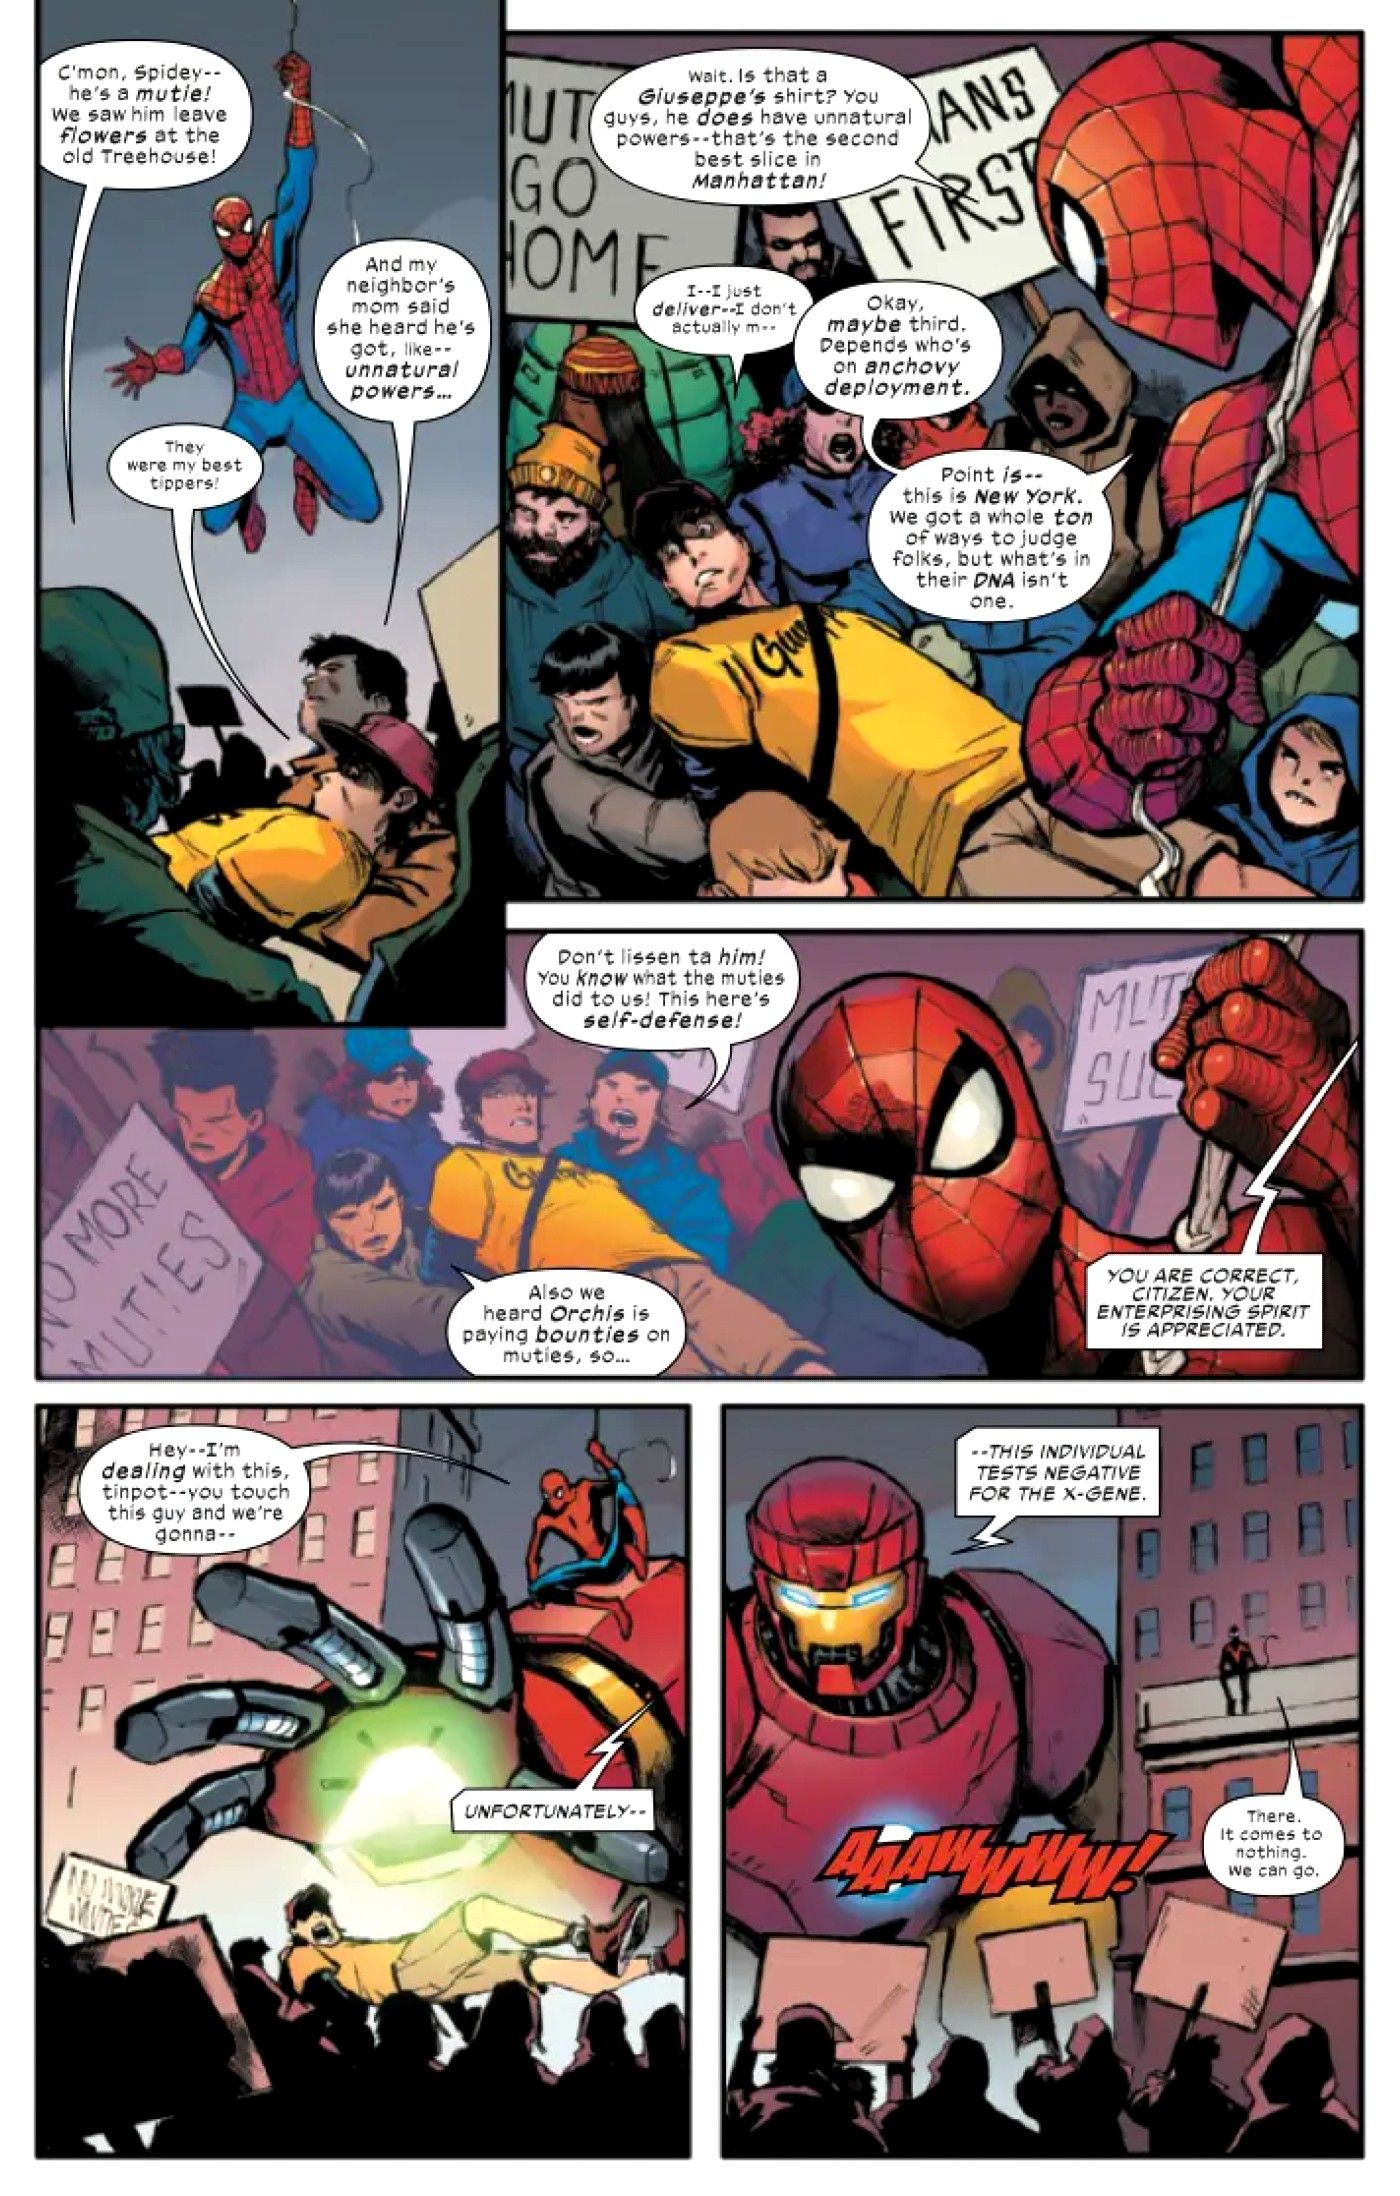 UNCANNY SPIDER-MAN 4 PREVIEW PAGE 2